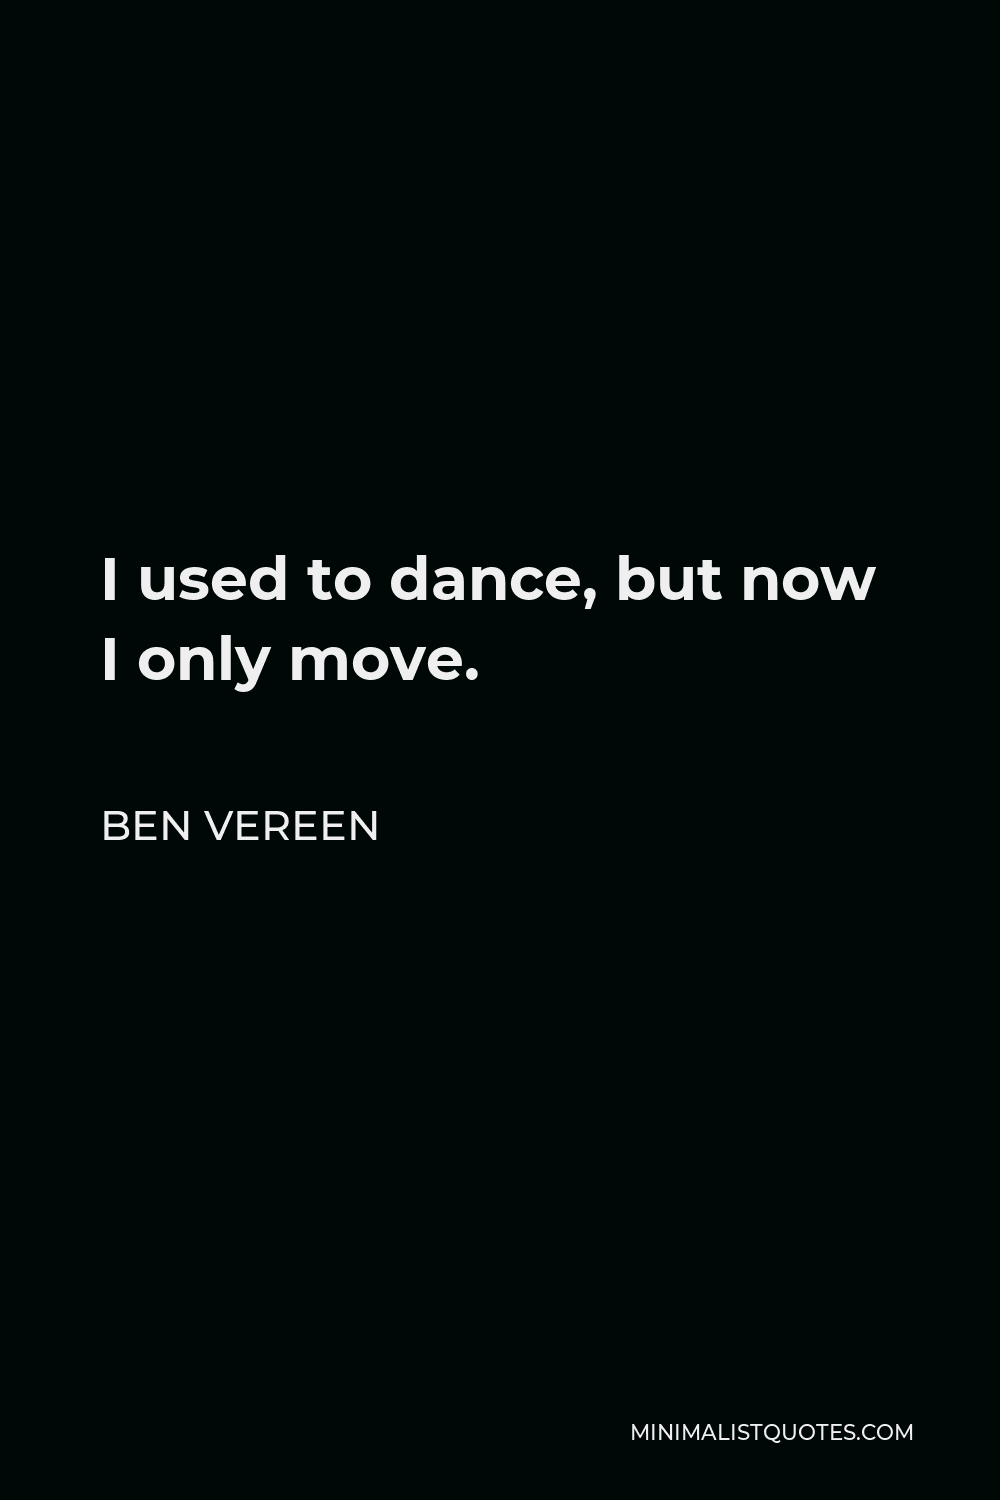 Ben Vereen Quote - I used to dance, but now I only move.